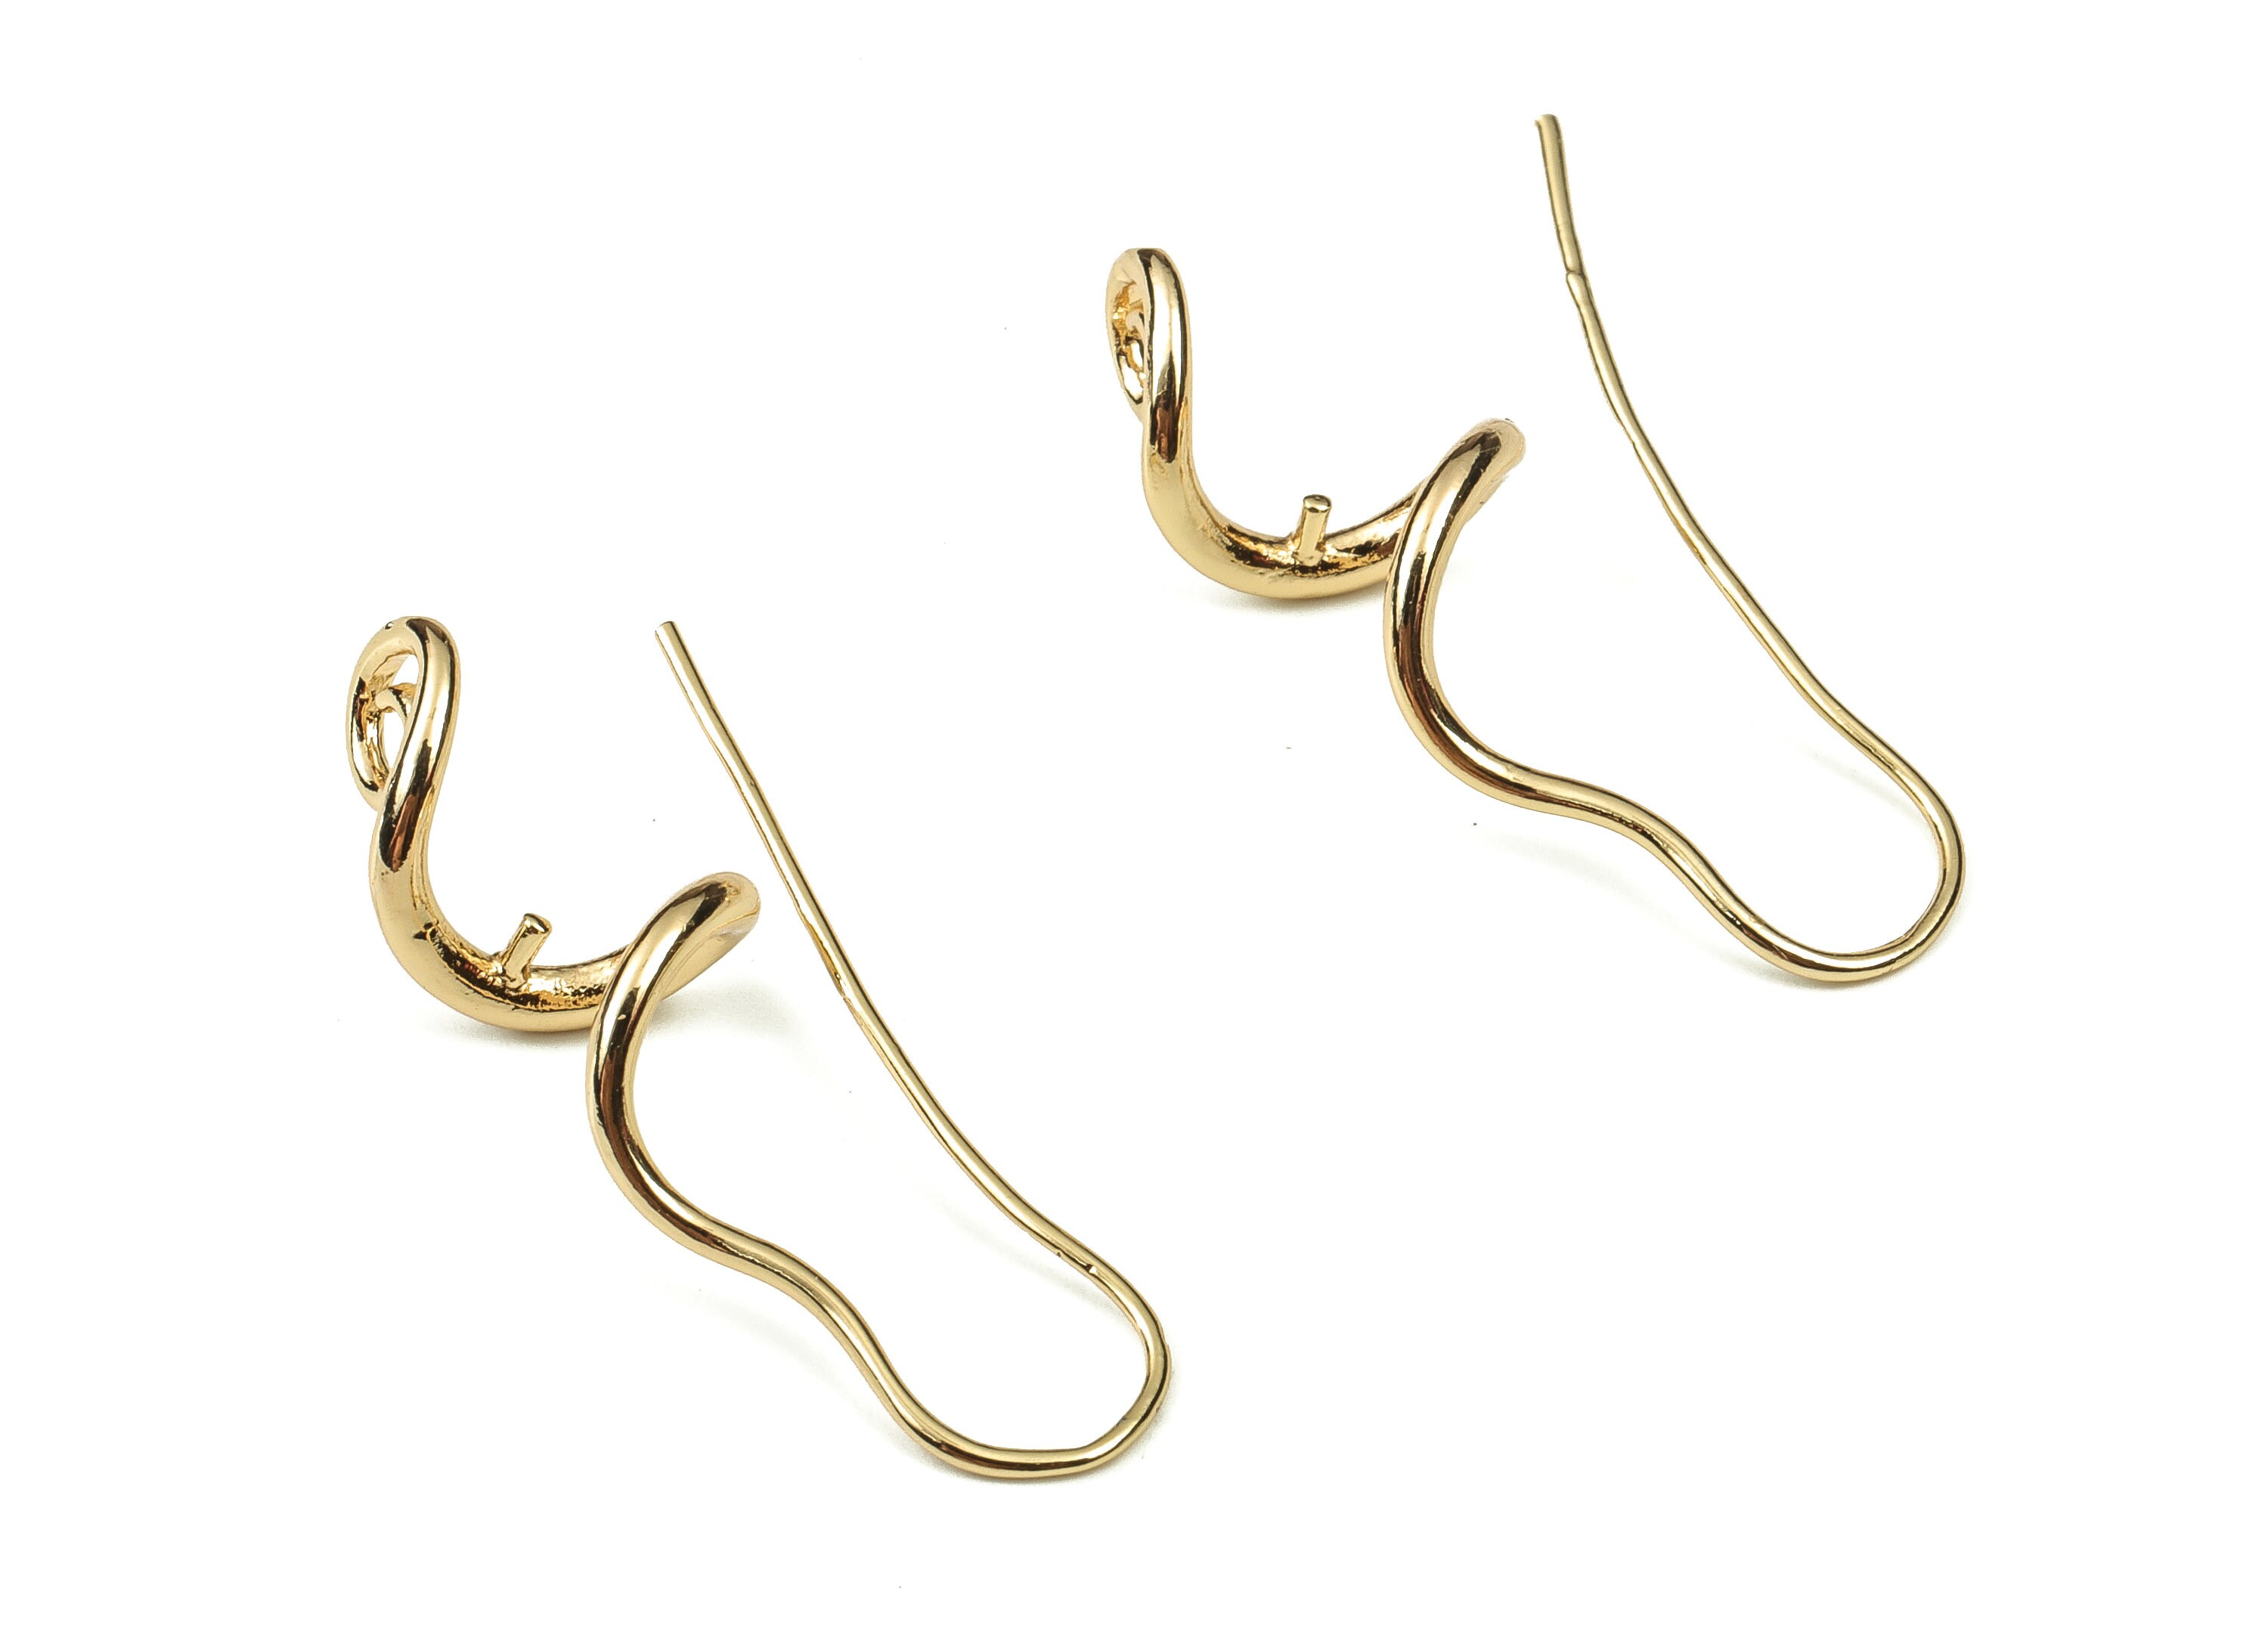 18K Gold Plated Flattened French Earrings hooks - luxury quality